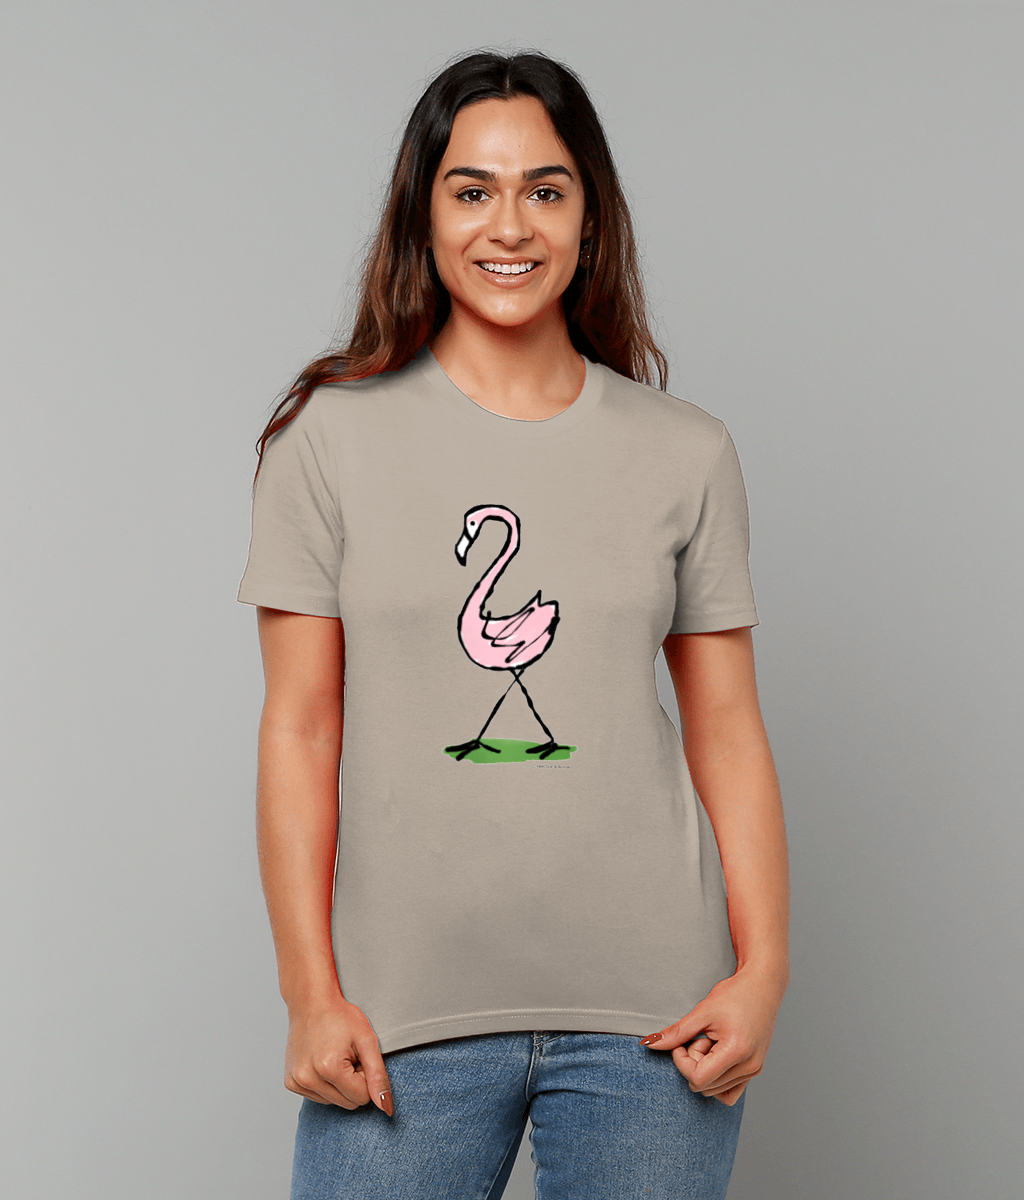 Pink Flamingo T-shirt - Young woman wearing an illustrated flamingo t-shirt design on sand colour tee by Hector and Bone